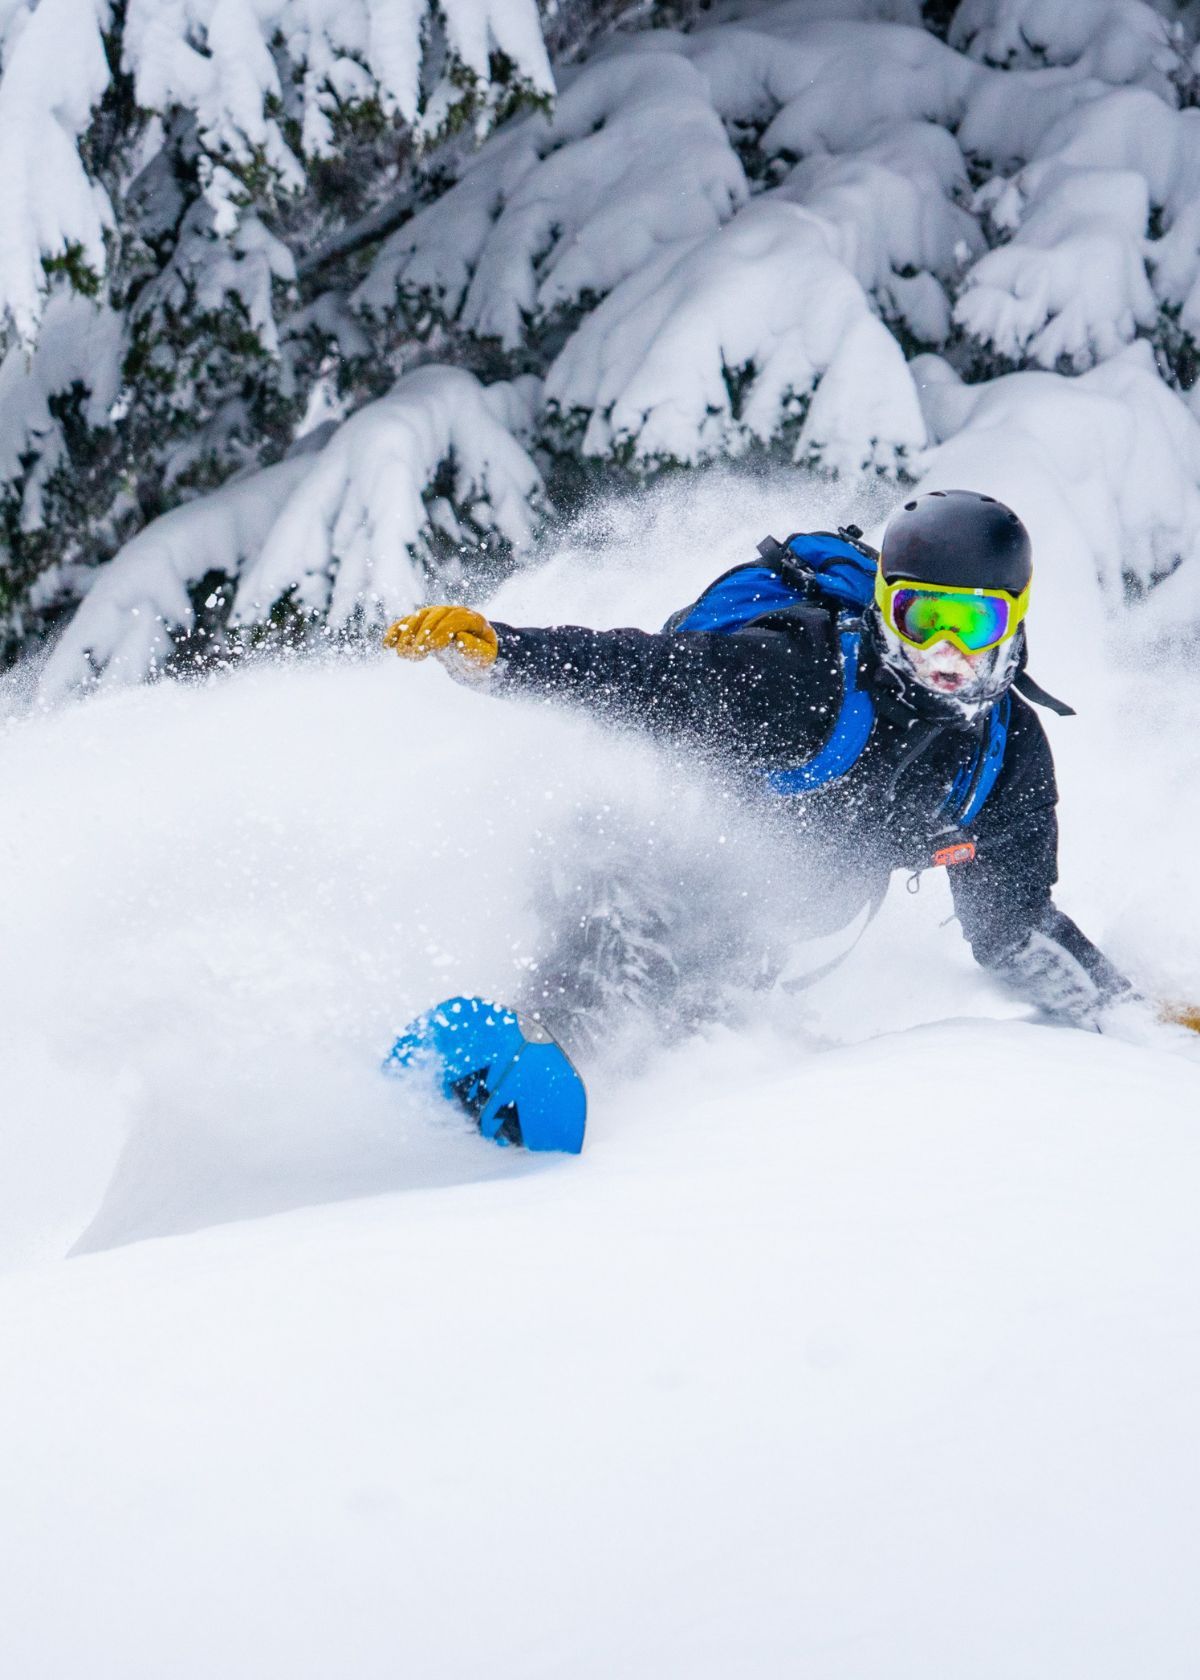 The Best Powder Snowboards For This 202223 Season